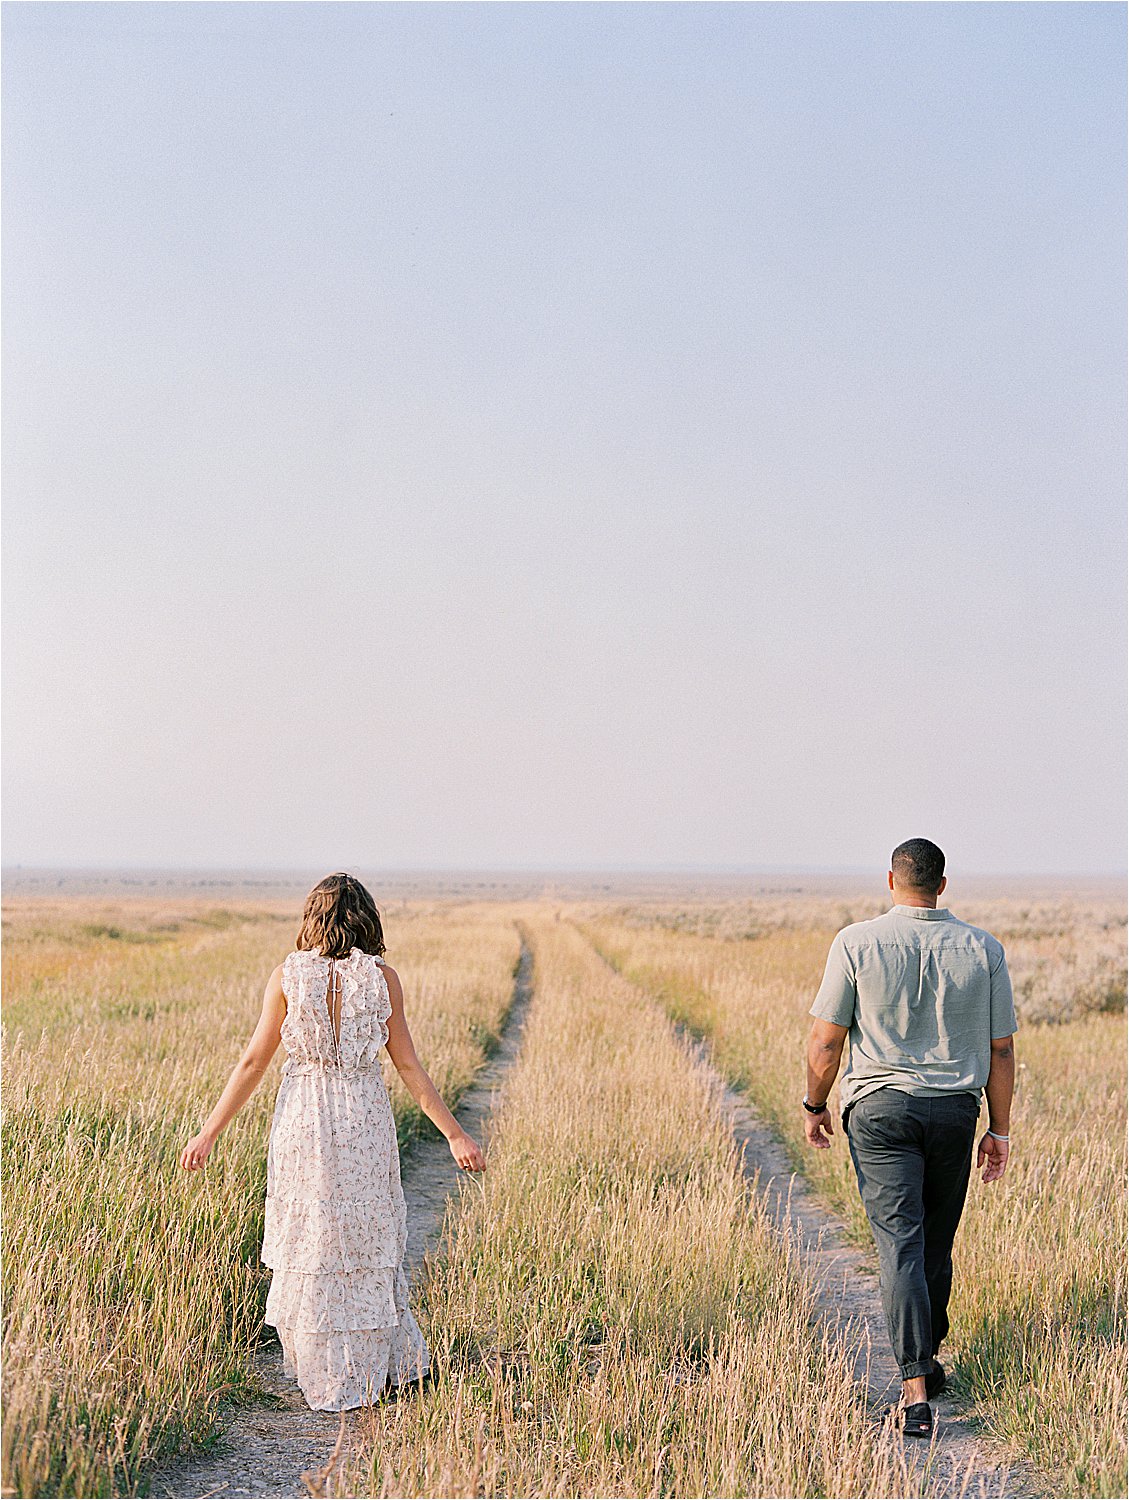 Playful engagement session in Wyoming with film wedding photographer Renee Hollingshead